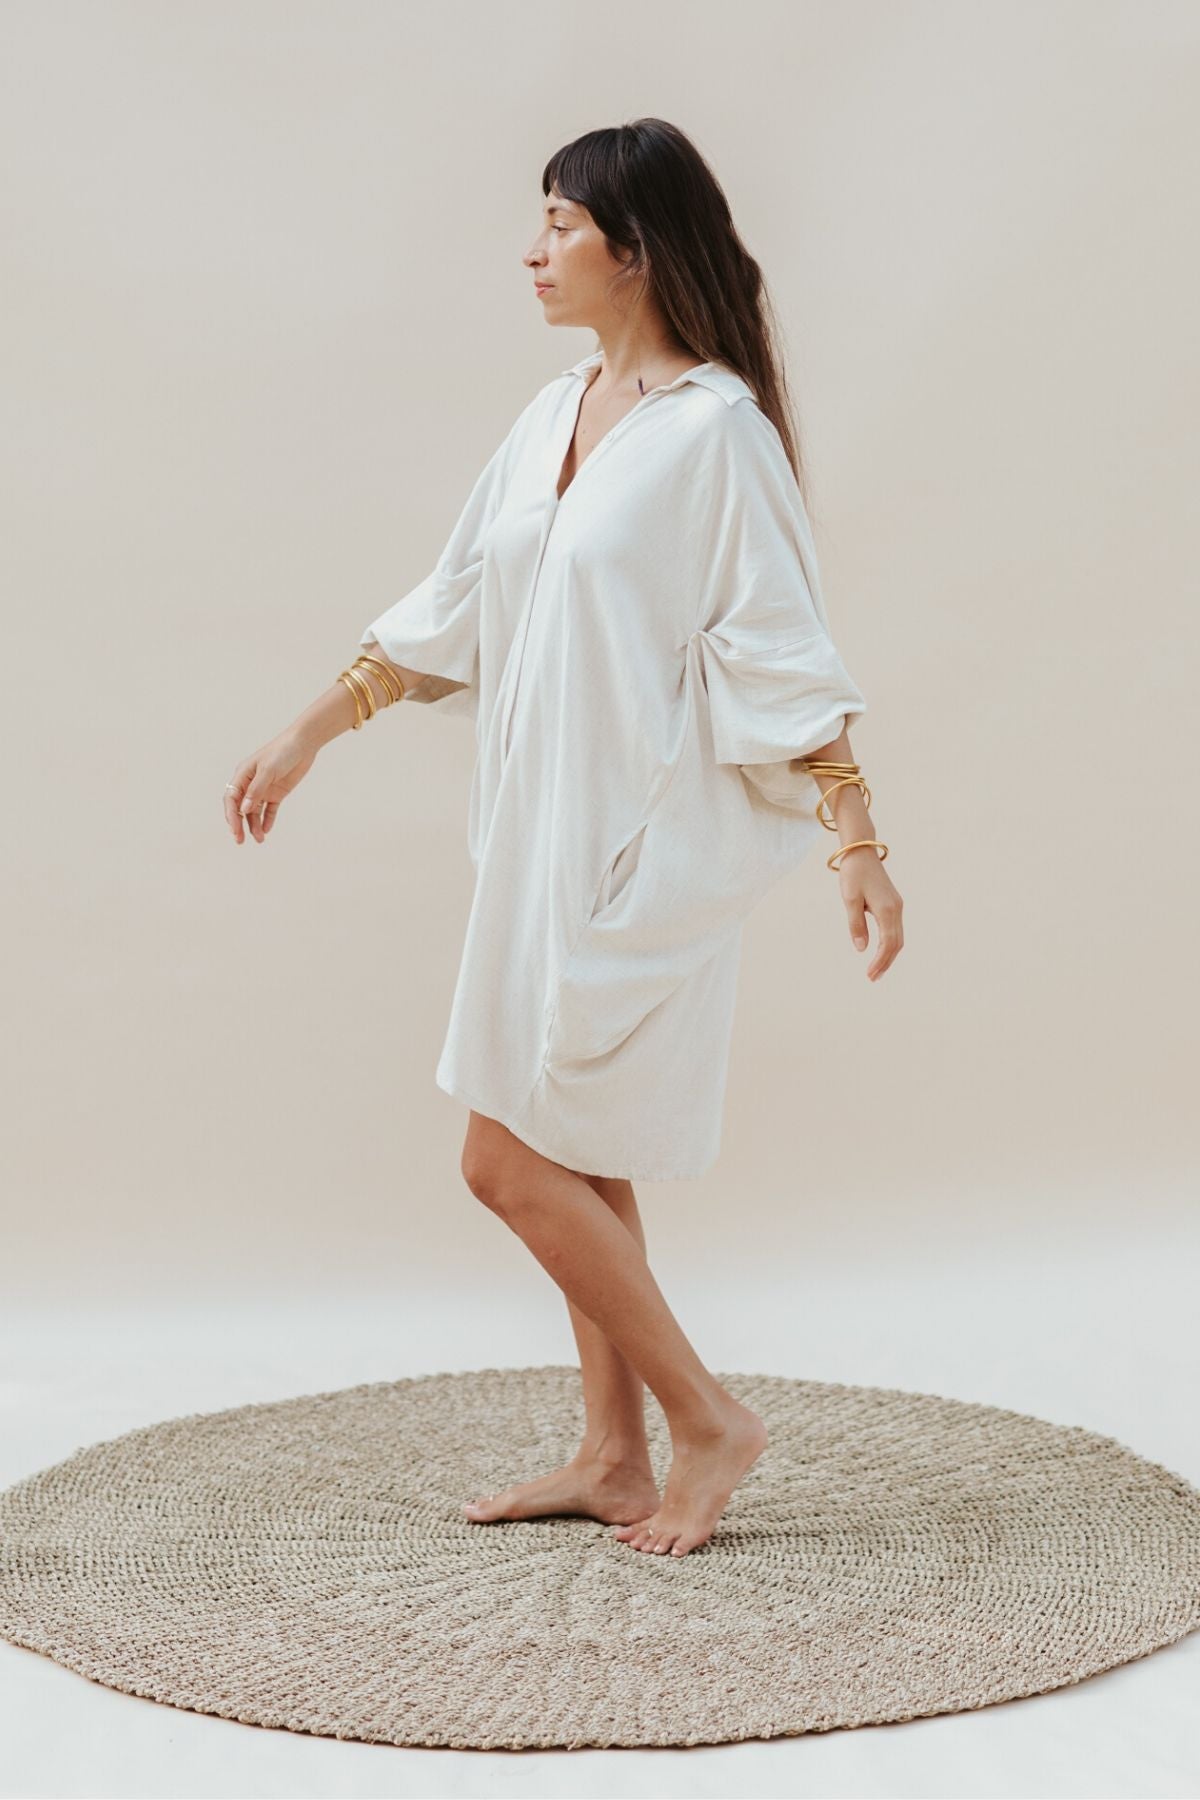 Origami Gown - Natural Linen / Rayon